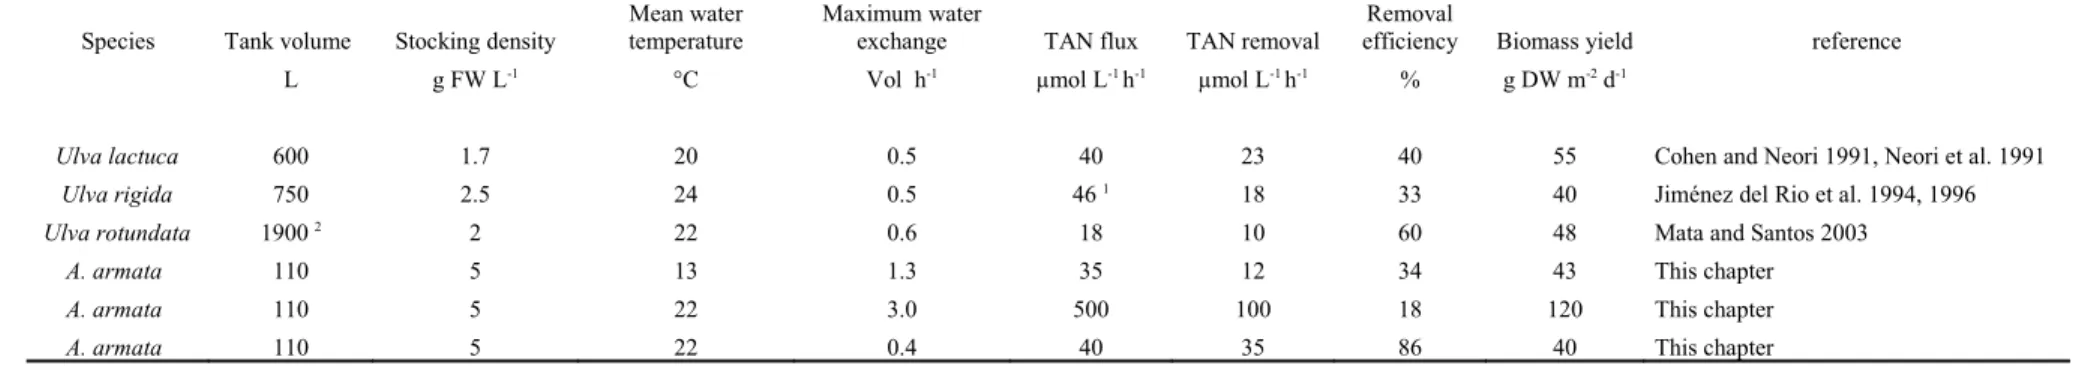 Table 1. Comparison of relevant biofiltration data of the genus Ulva with Asparagopsis armata (Falkenbergia phase).